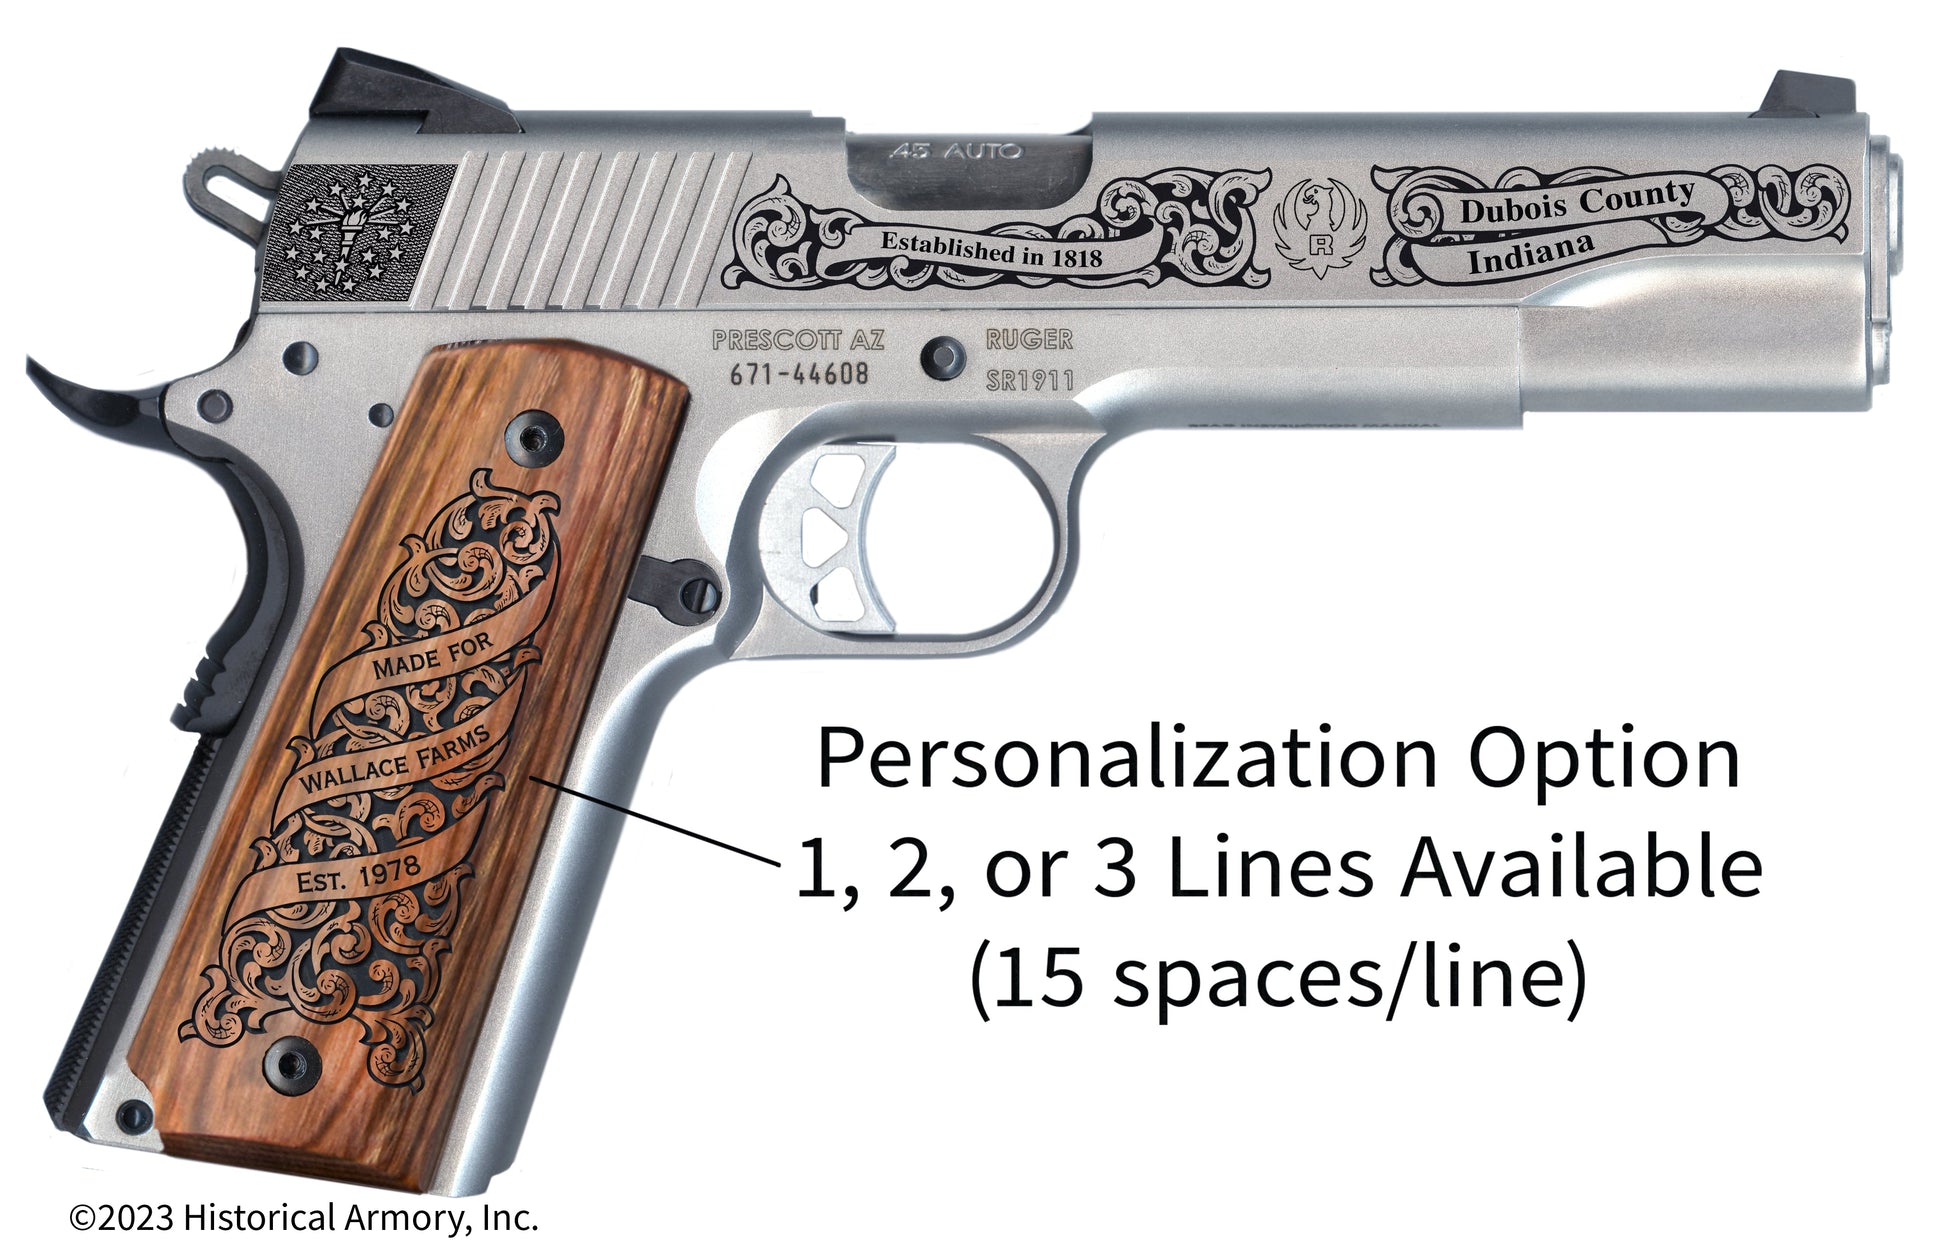 Dubois County Indiana Personalized Engraved .45 Auto Ruger 1911